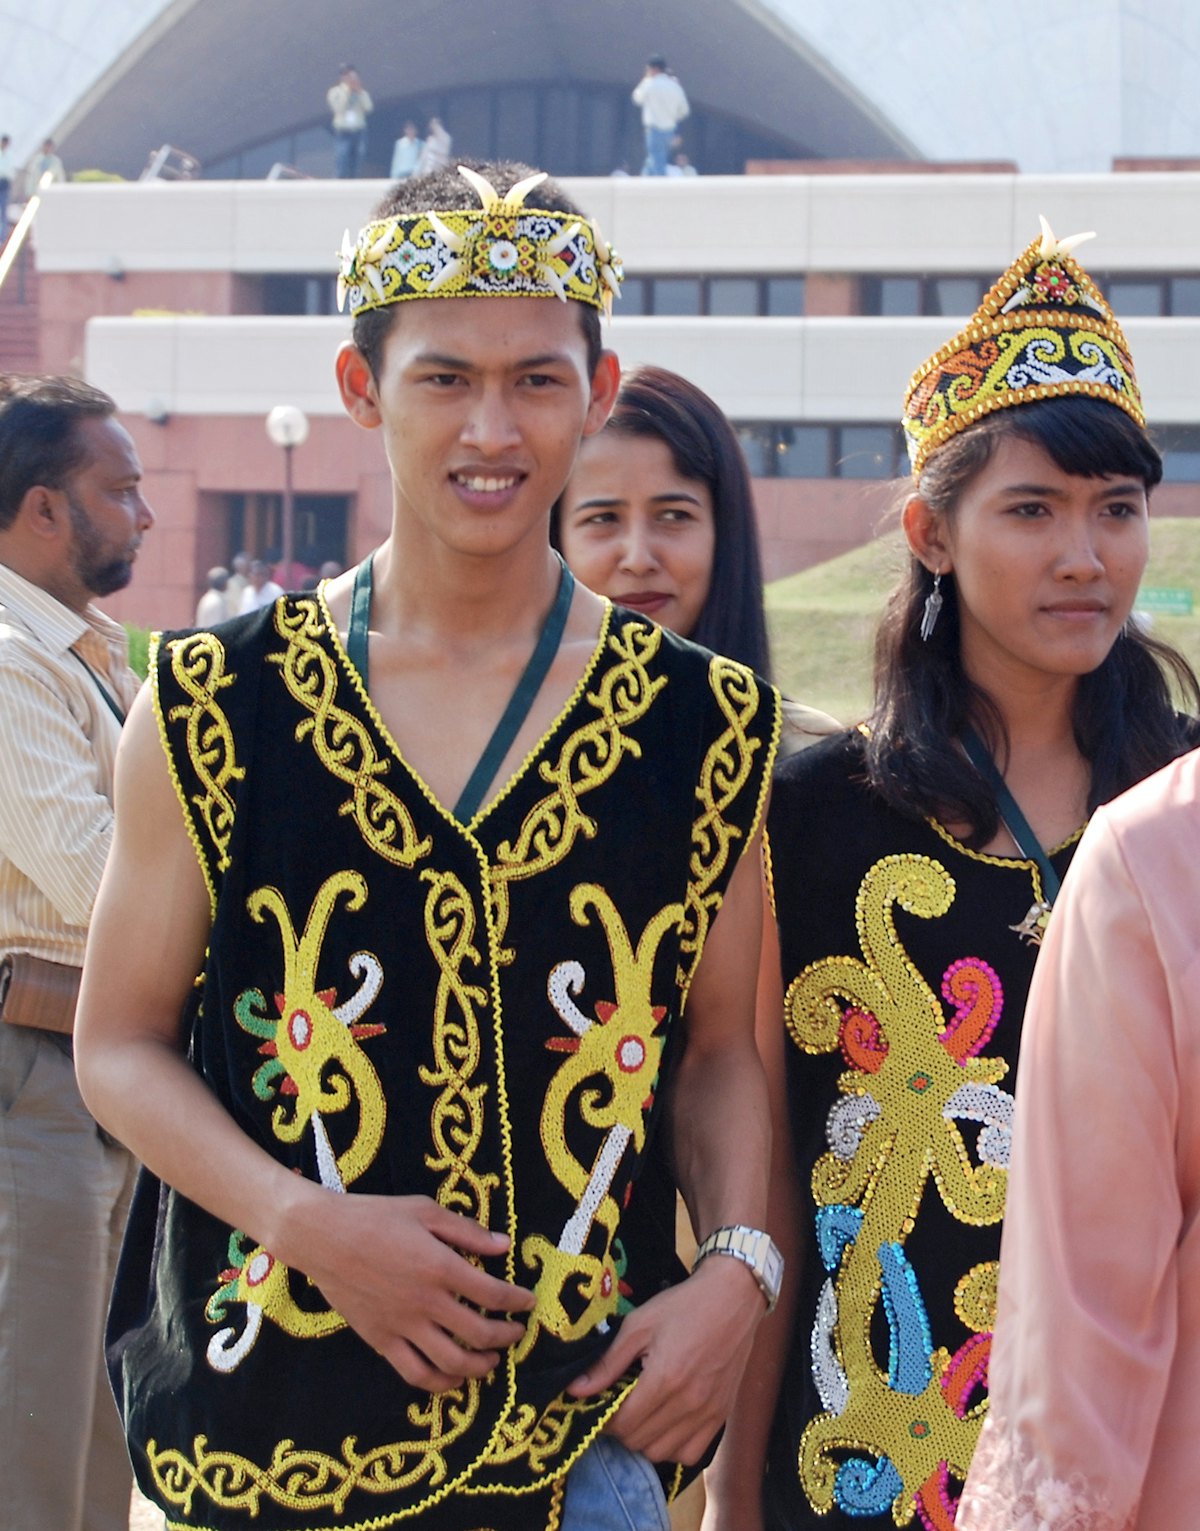 Almost 60 countries were represented at the silver jubilee festivities for the Baha'i House of Worship in New Delhi, 11-12 November 2011, which culminated in a parade of the nations represented. Pictured are visitors from Indonesia in traditional costume.